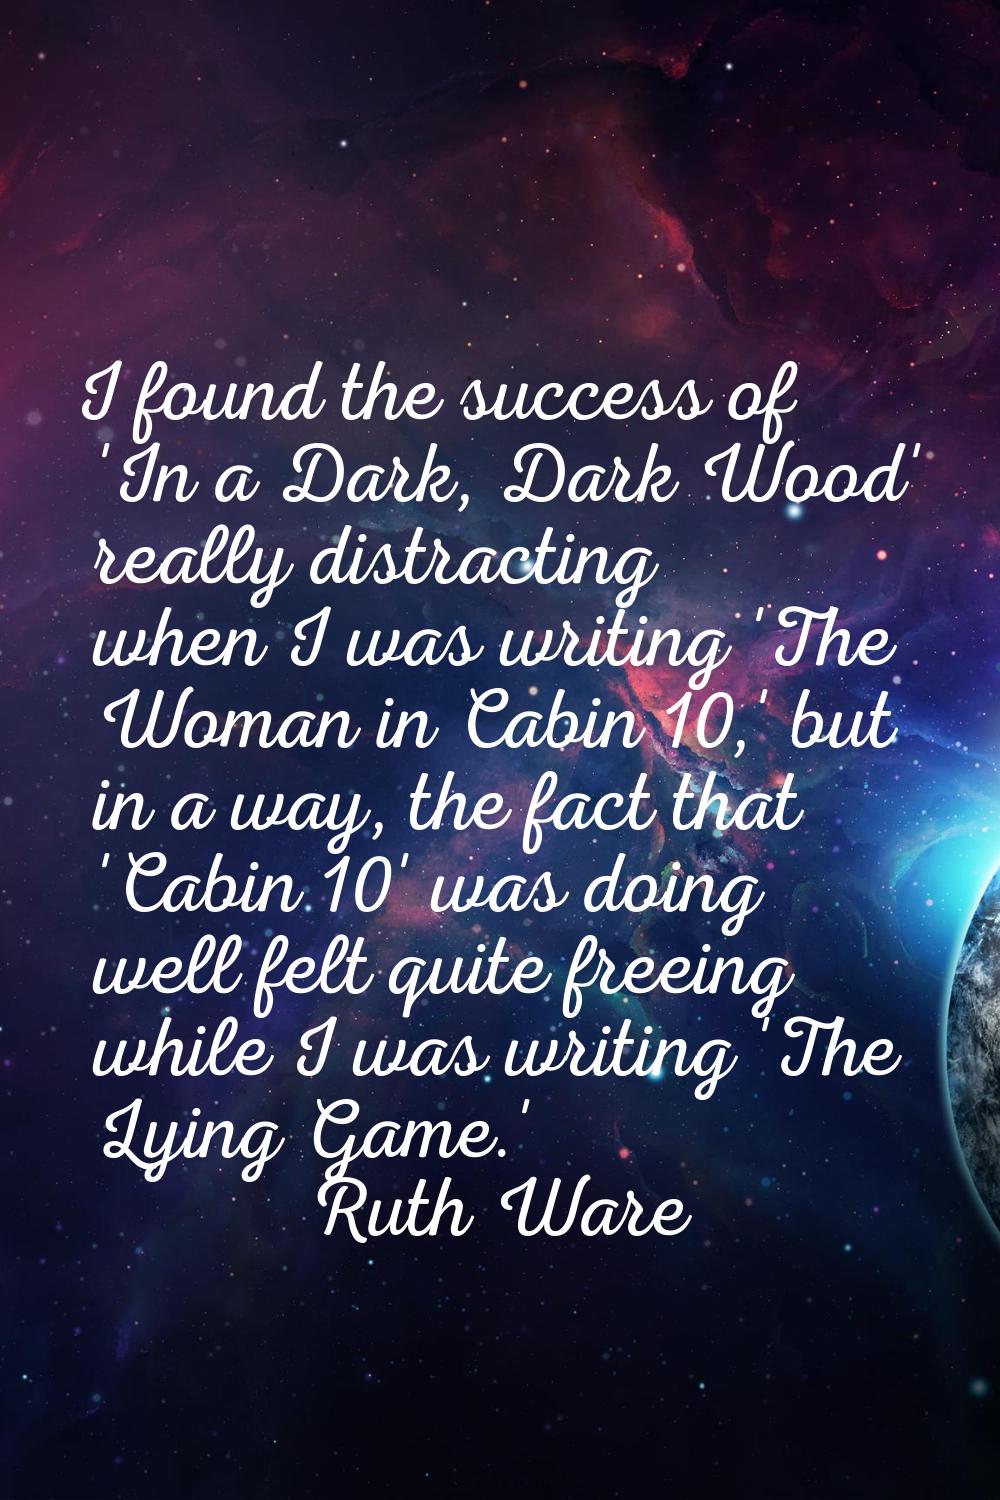 I found the success of 'In a Dark, Dark Wood' really distracting when I was writing 'The Woman in C